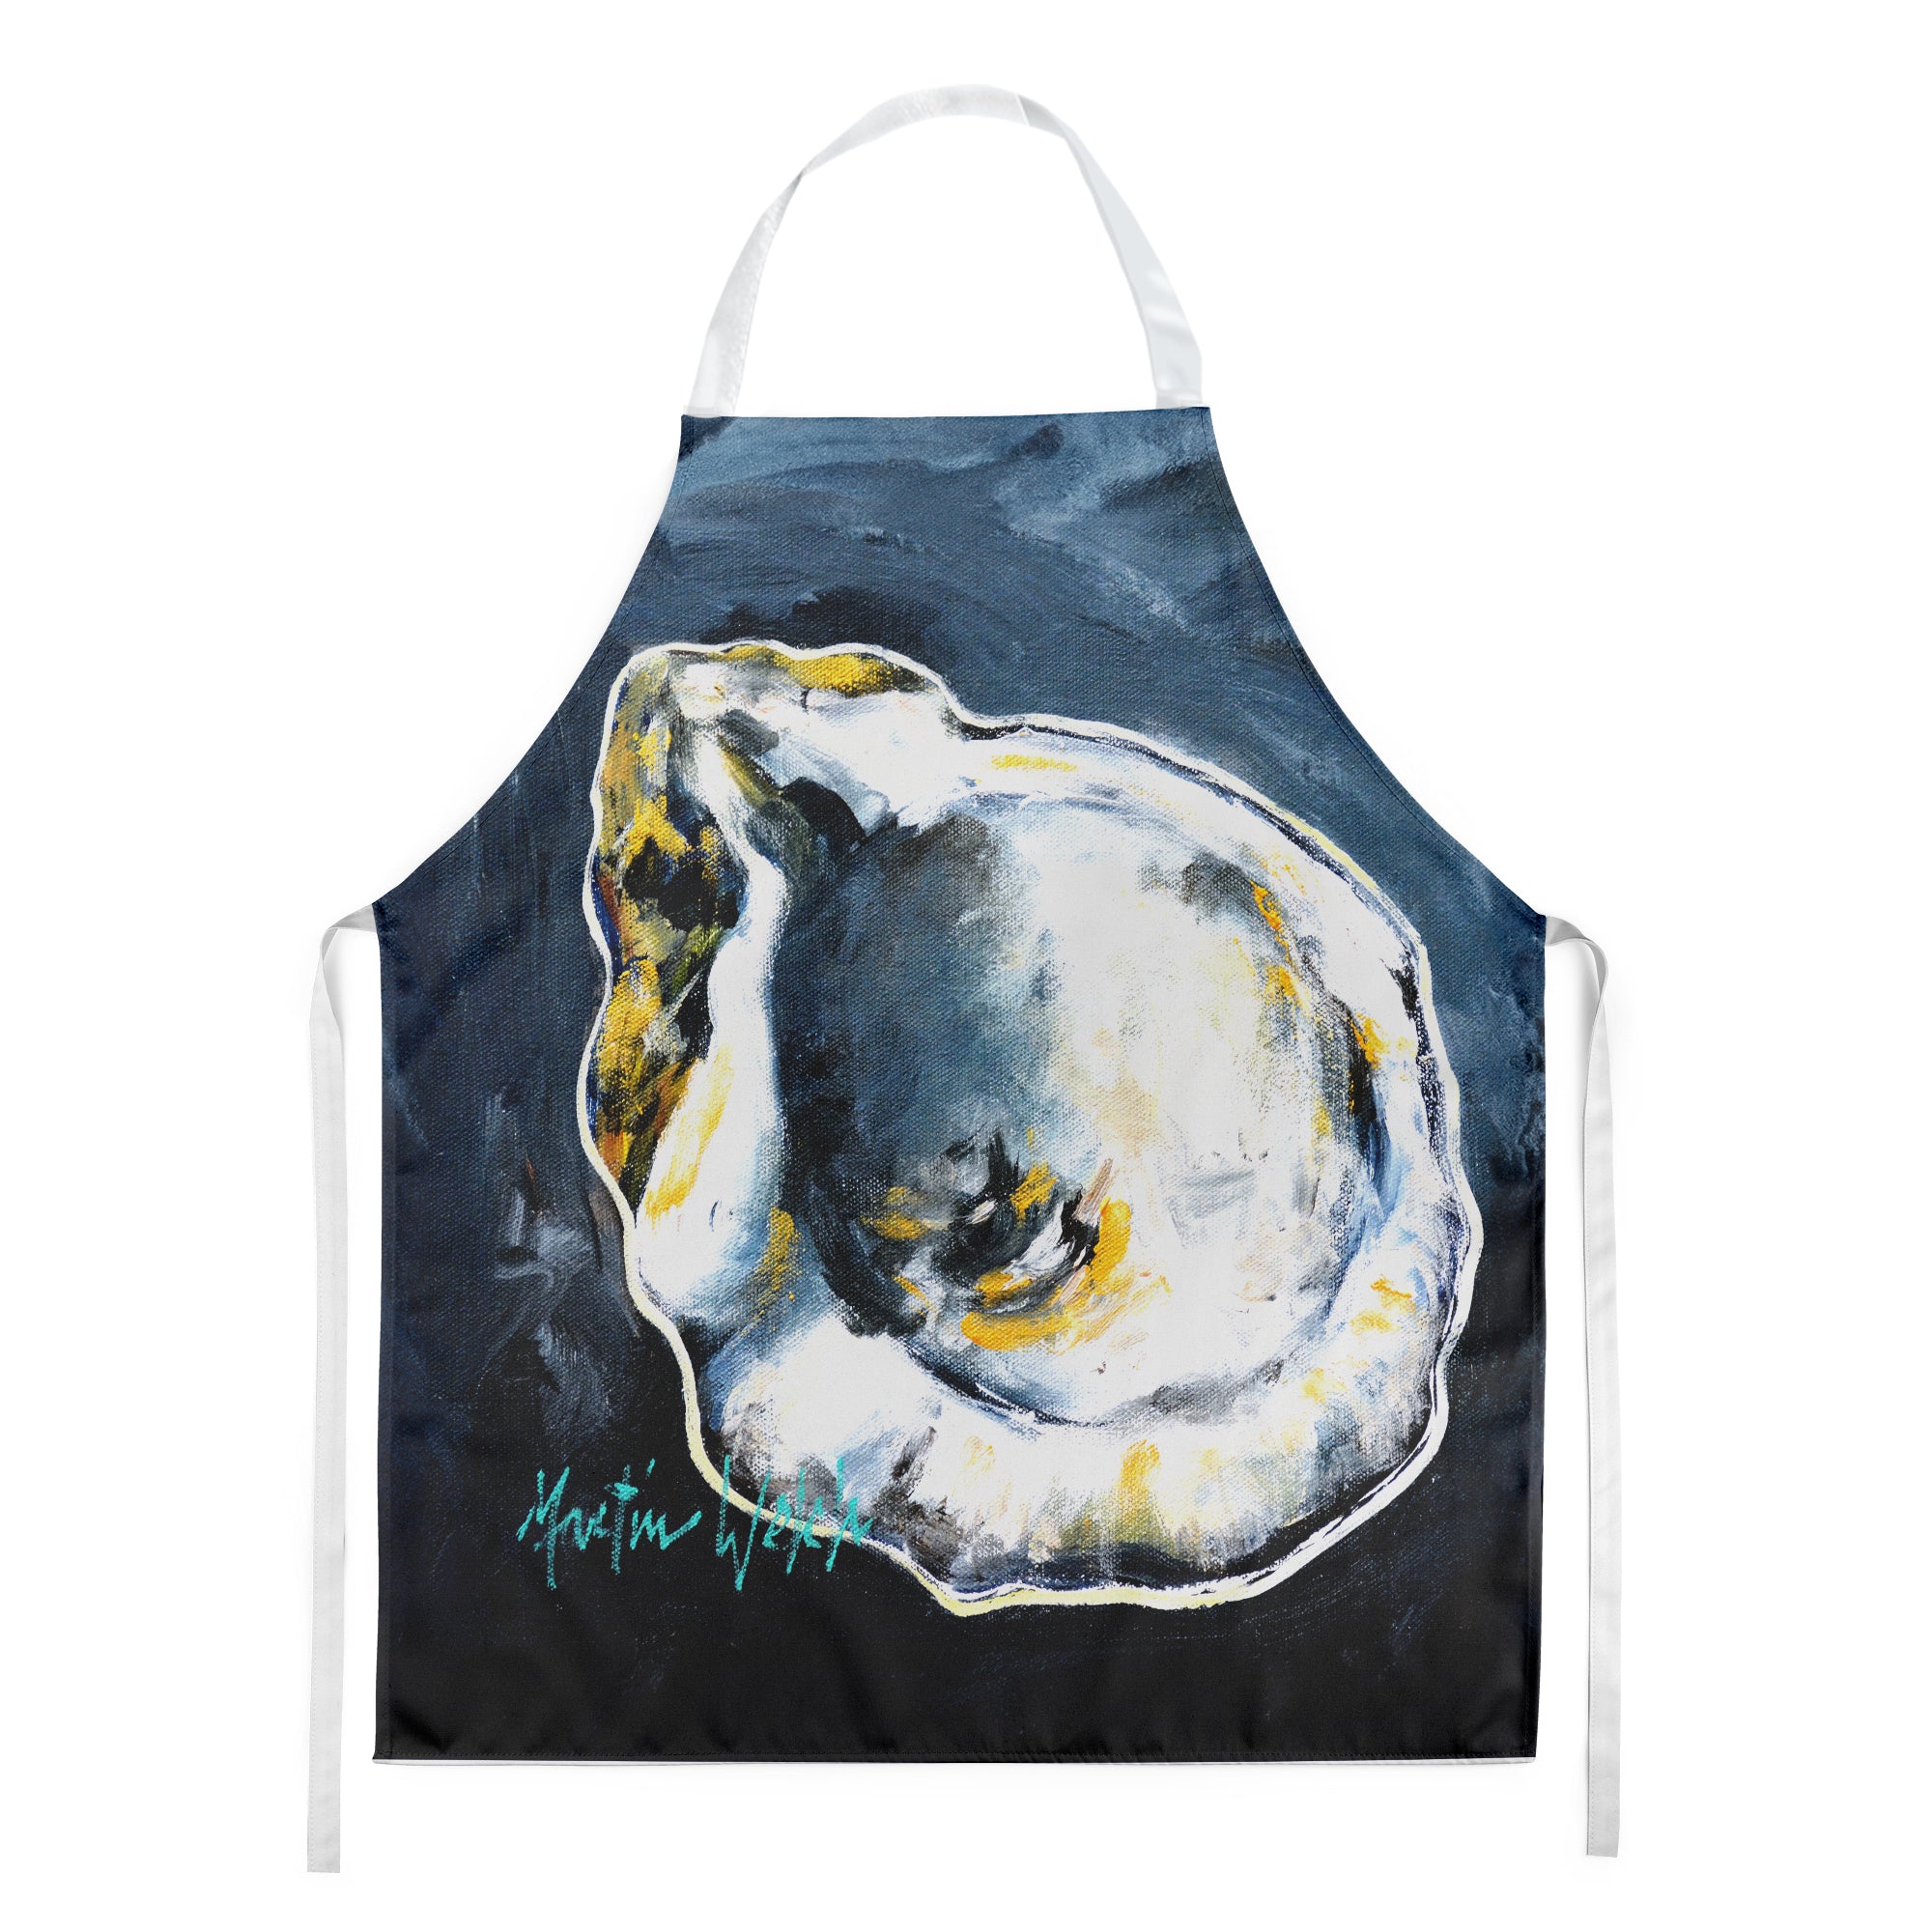 Buy this Blue Star Oyster Apron